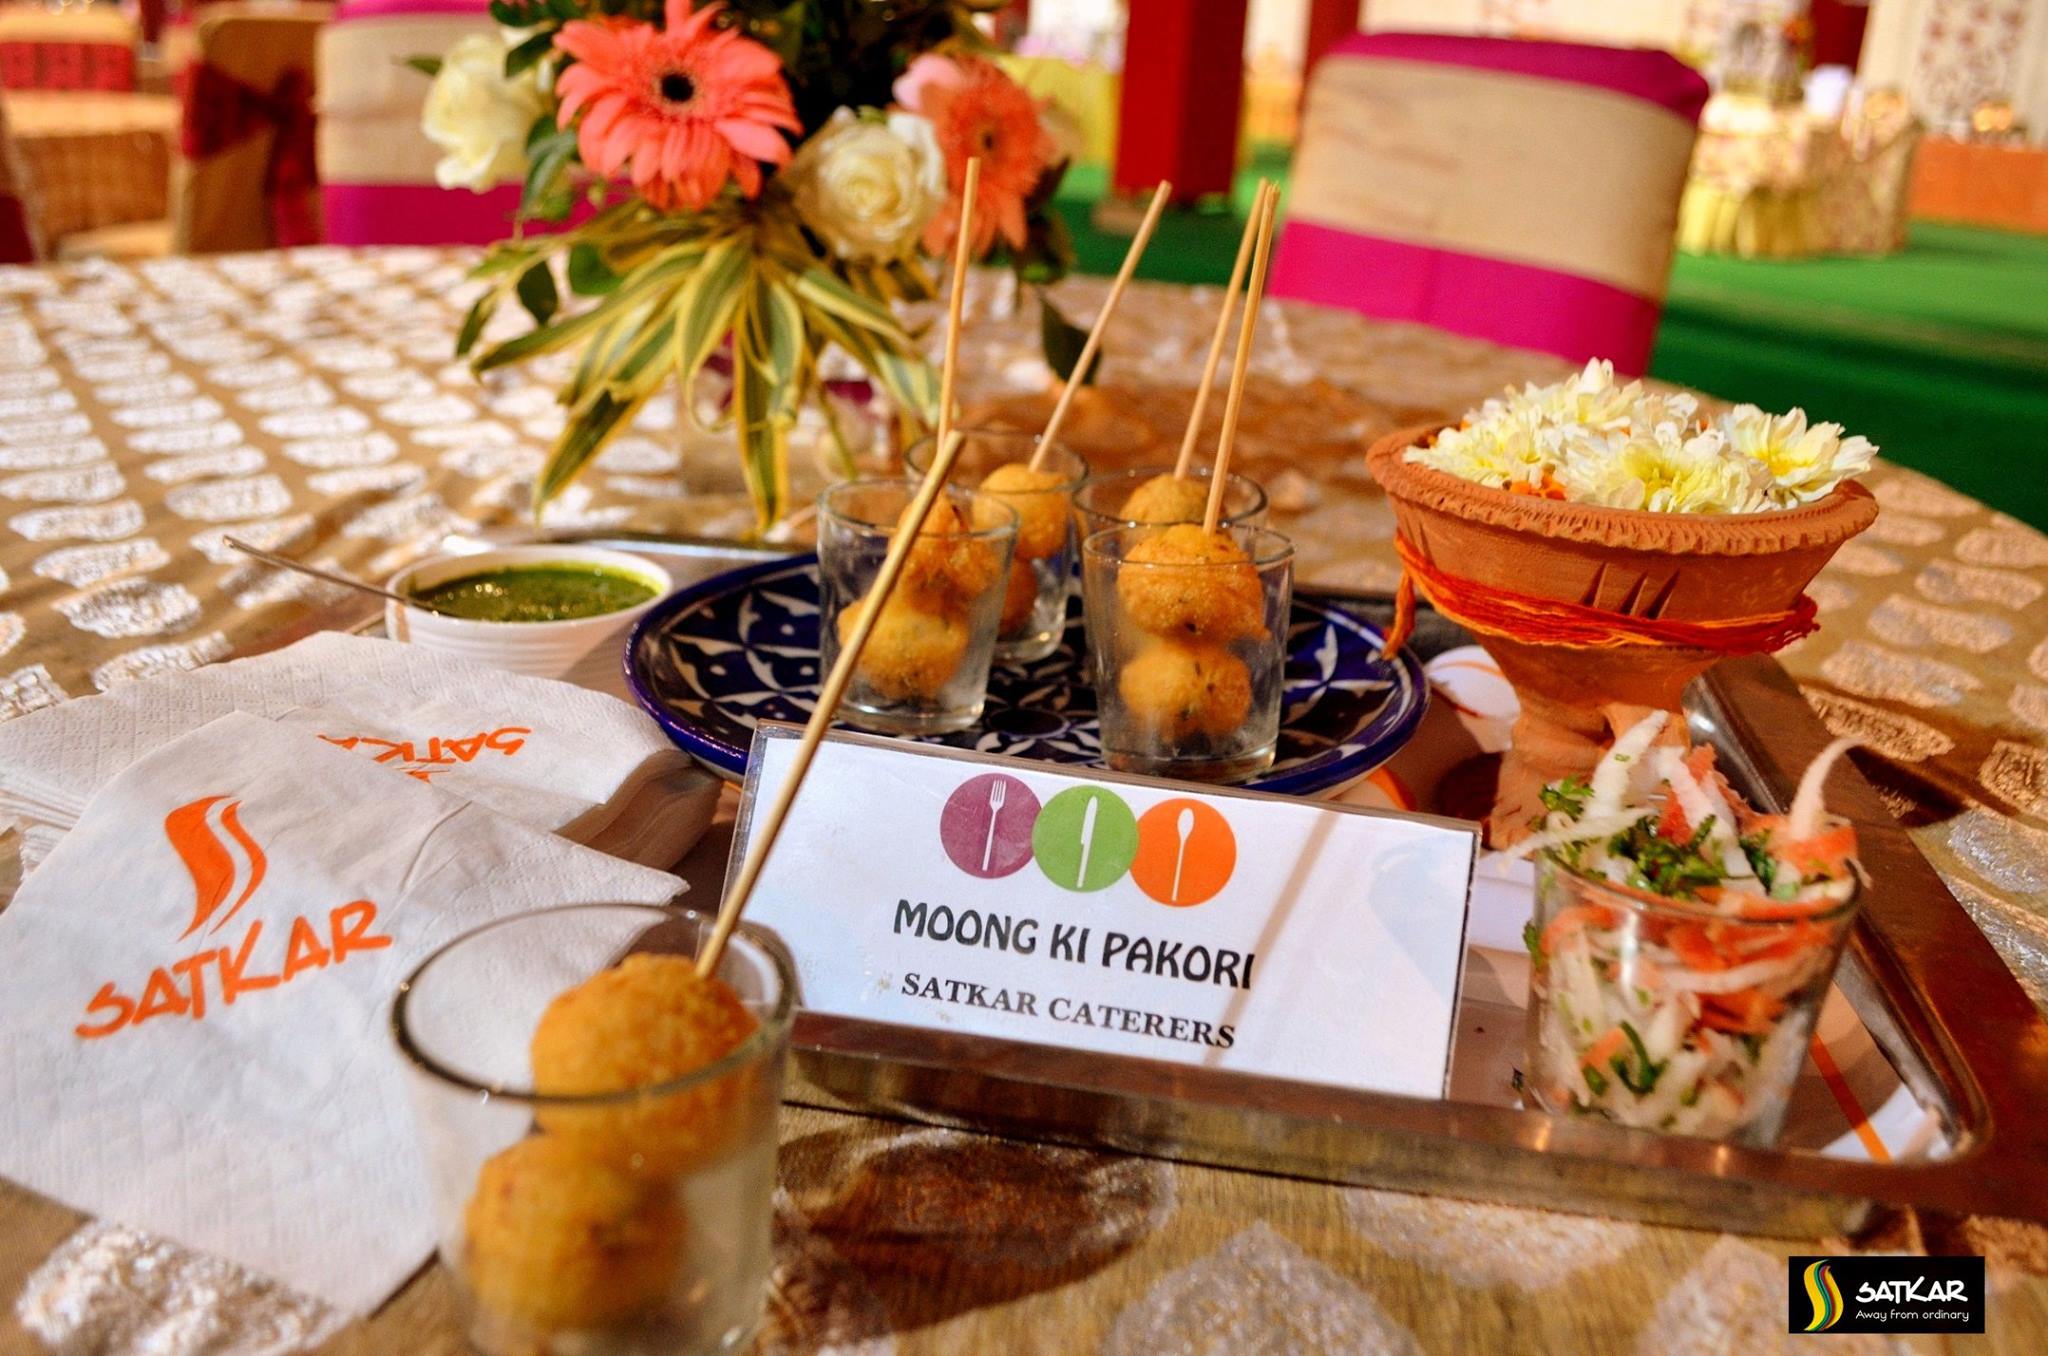 wedding caterers,satkar caterers